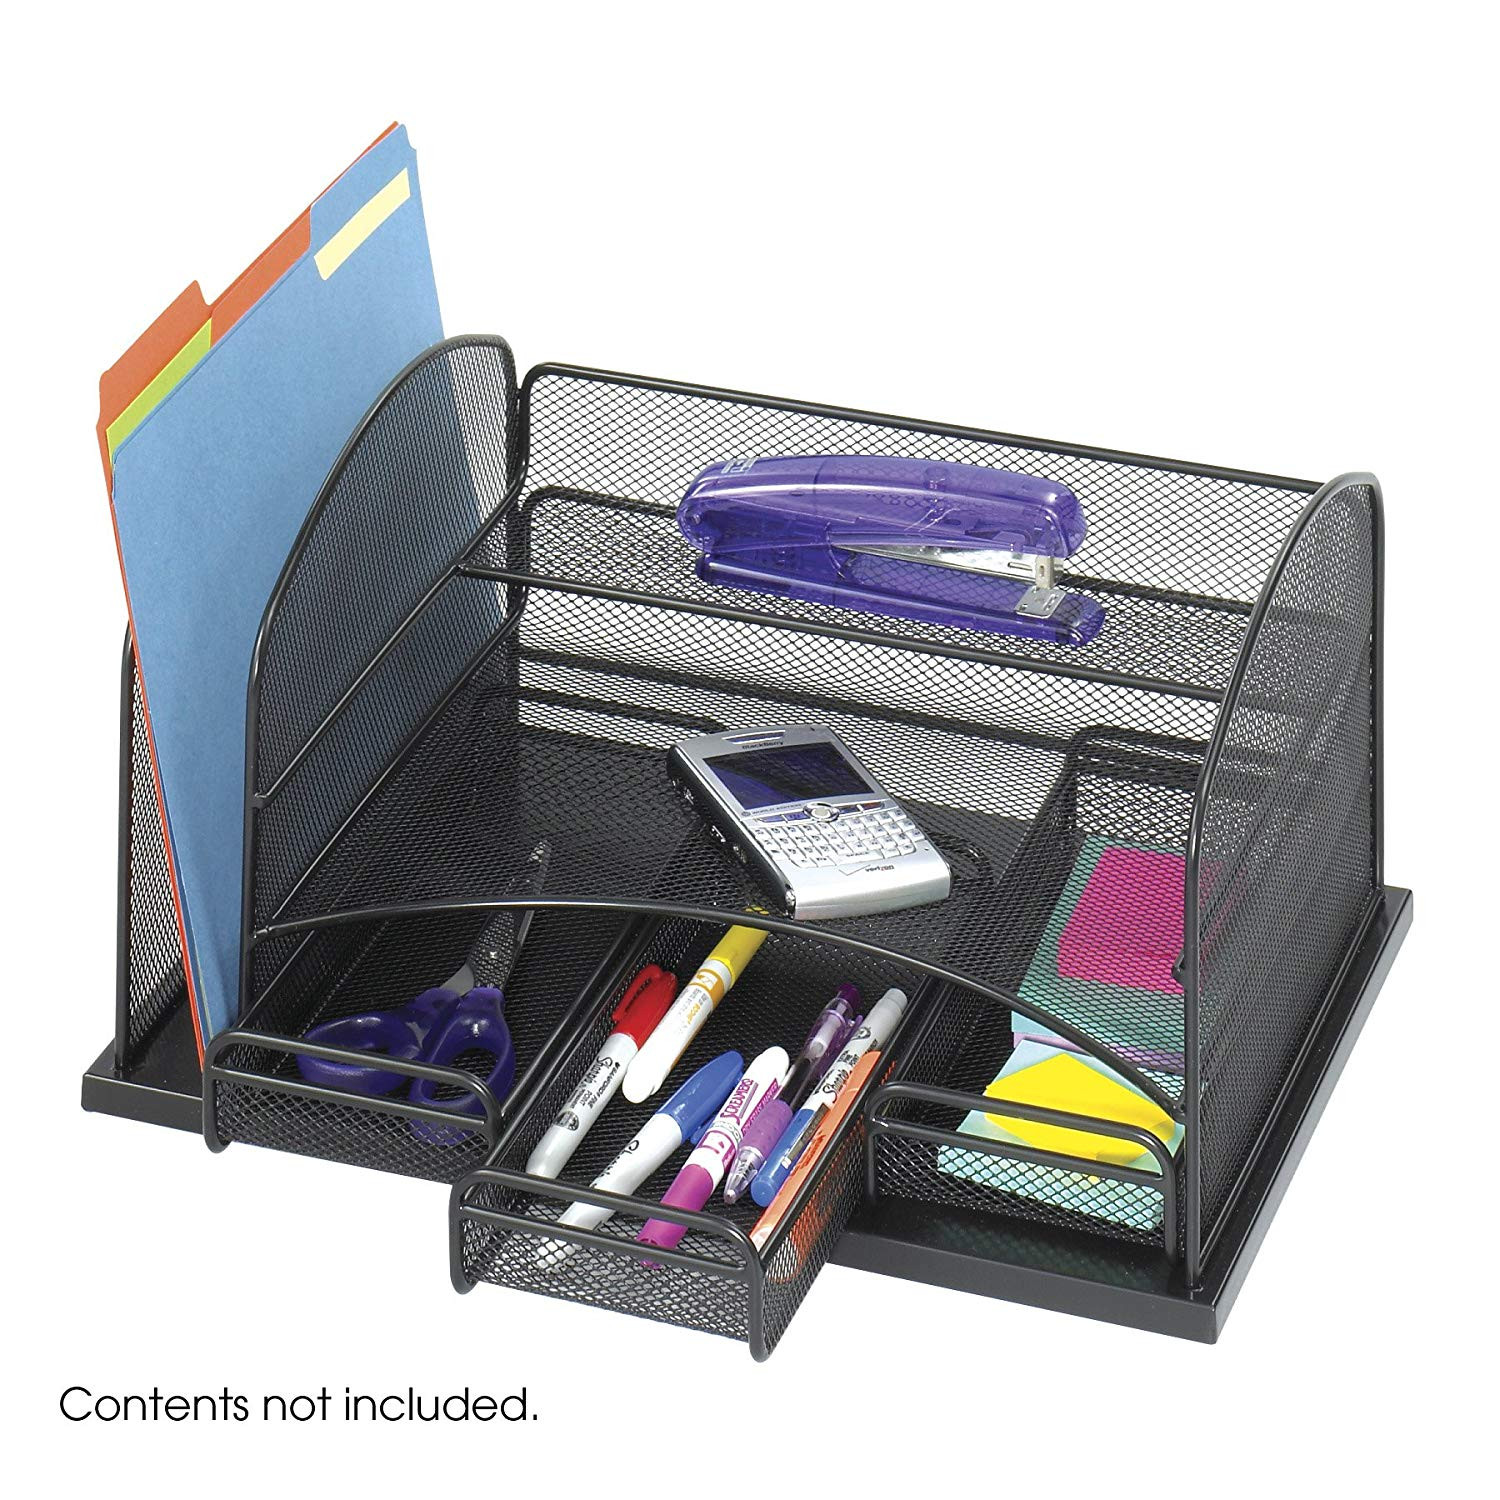 Office Desk Drawer Organizer
 Safco Products yx Mesh Desk Organizer with 3 Drawers